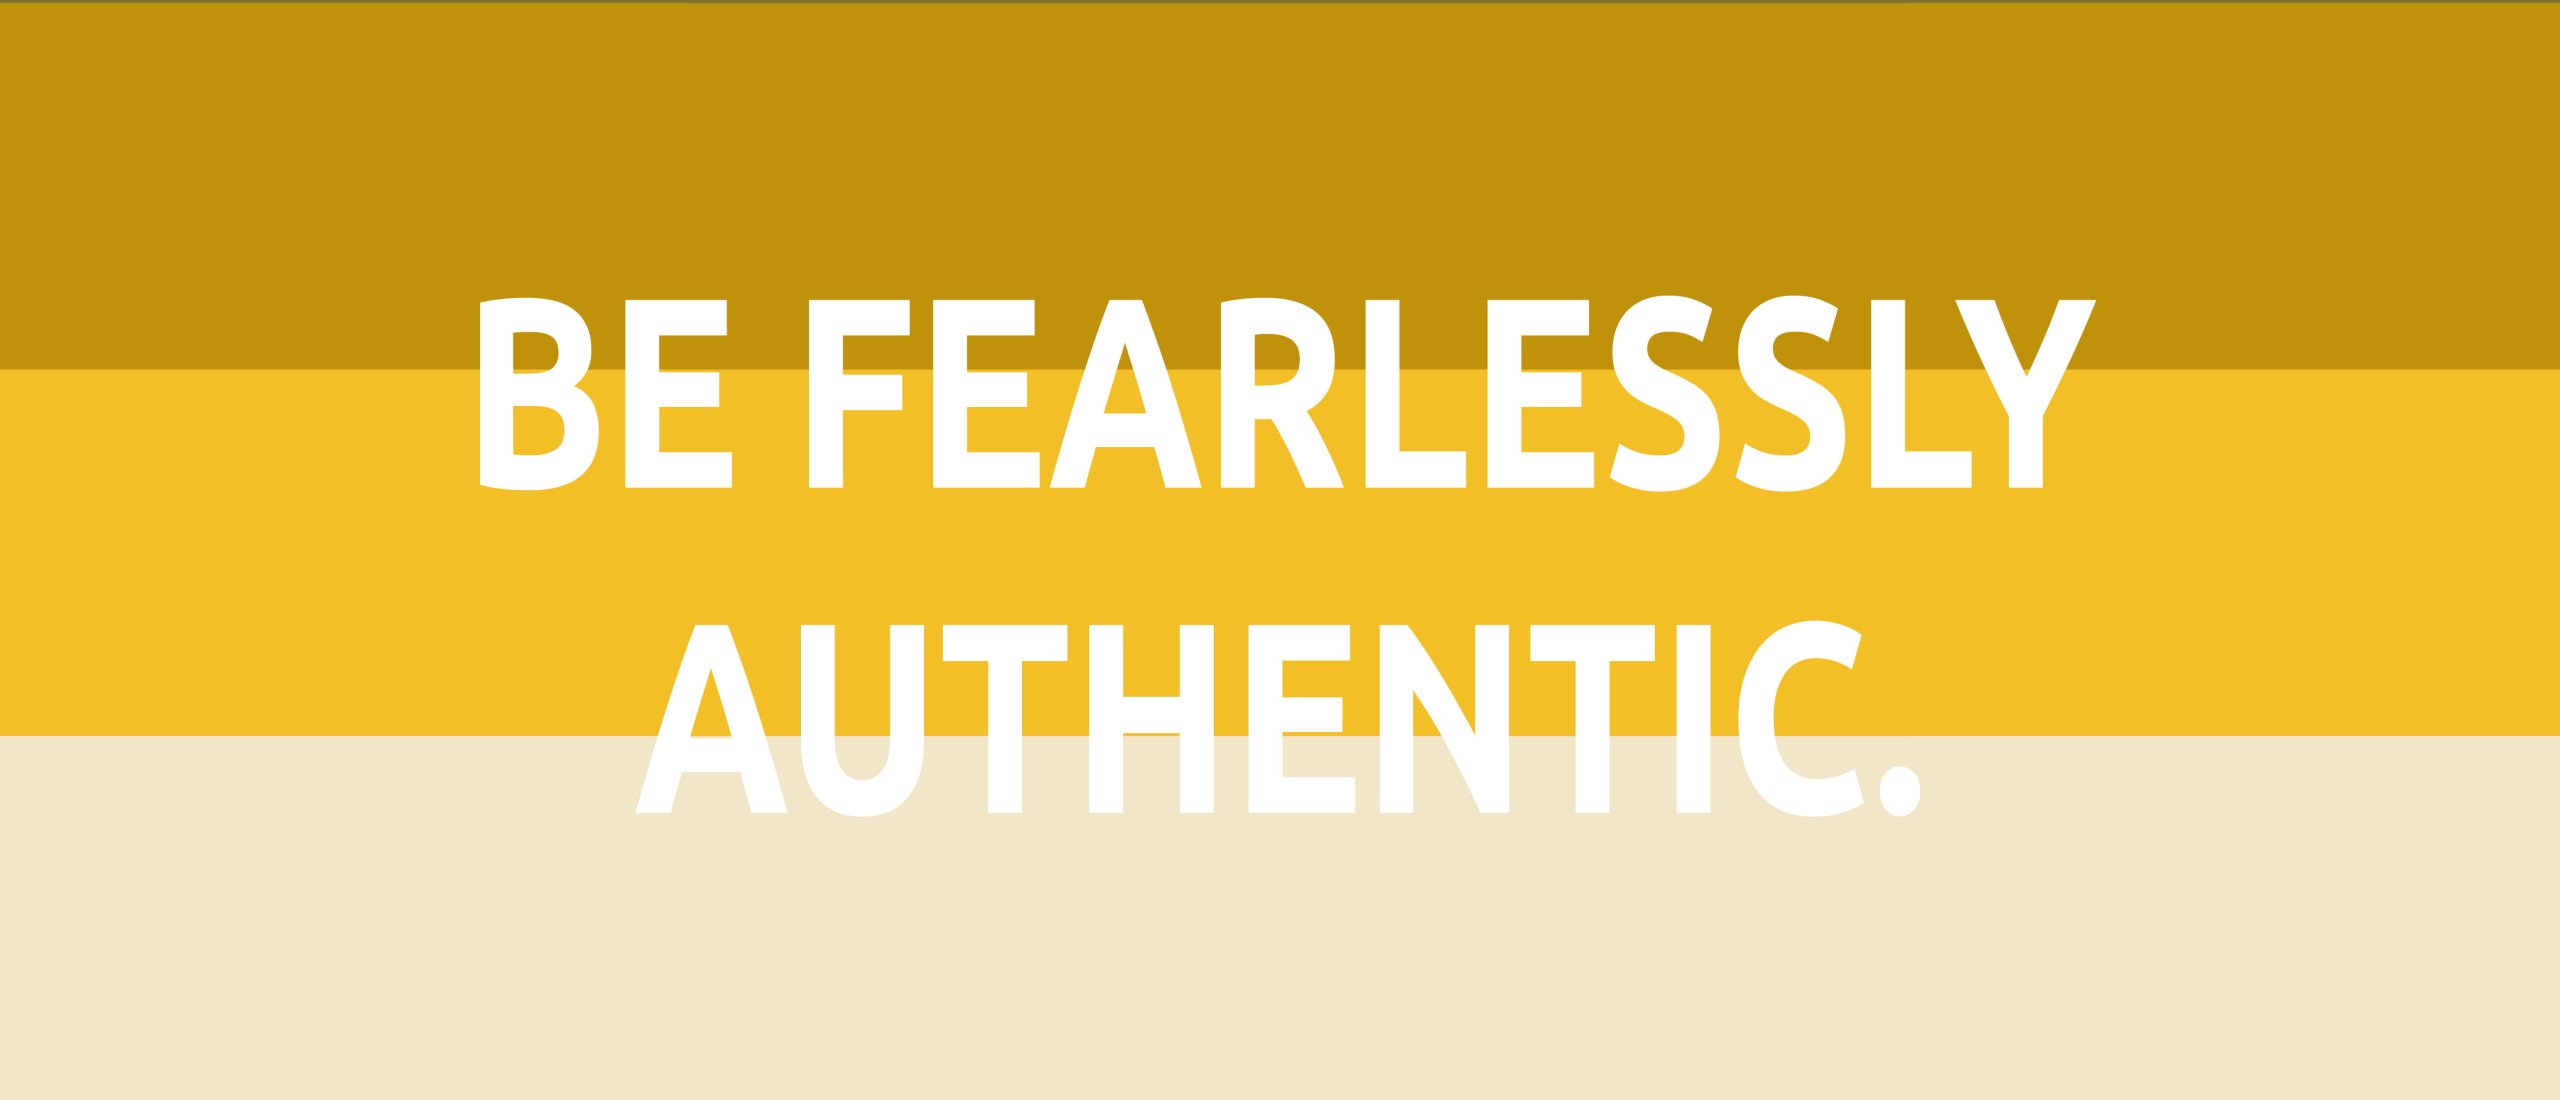 Fearlessly authentic